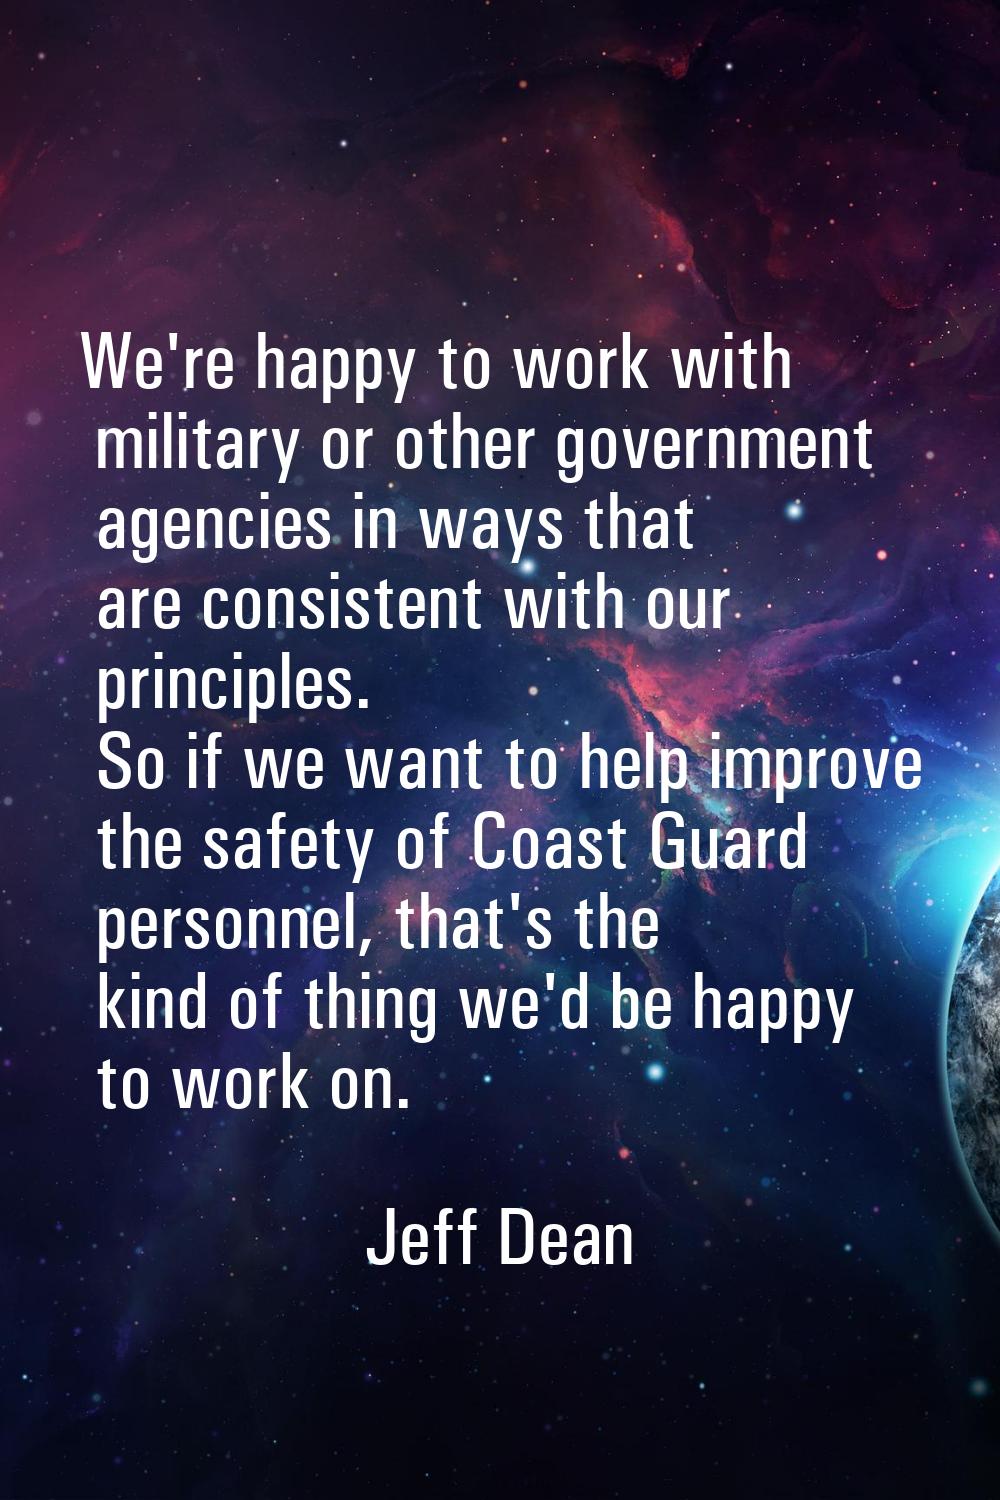 We're happy to work with military or other government agencies in ways that are consistent with our